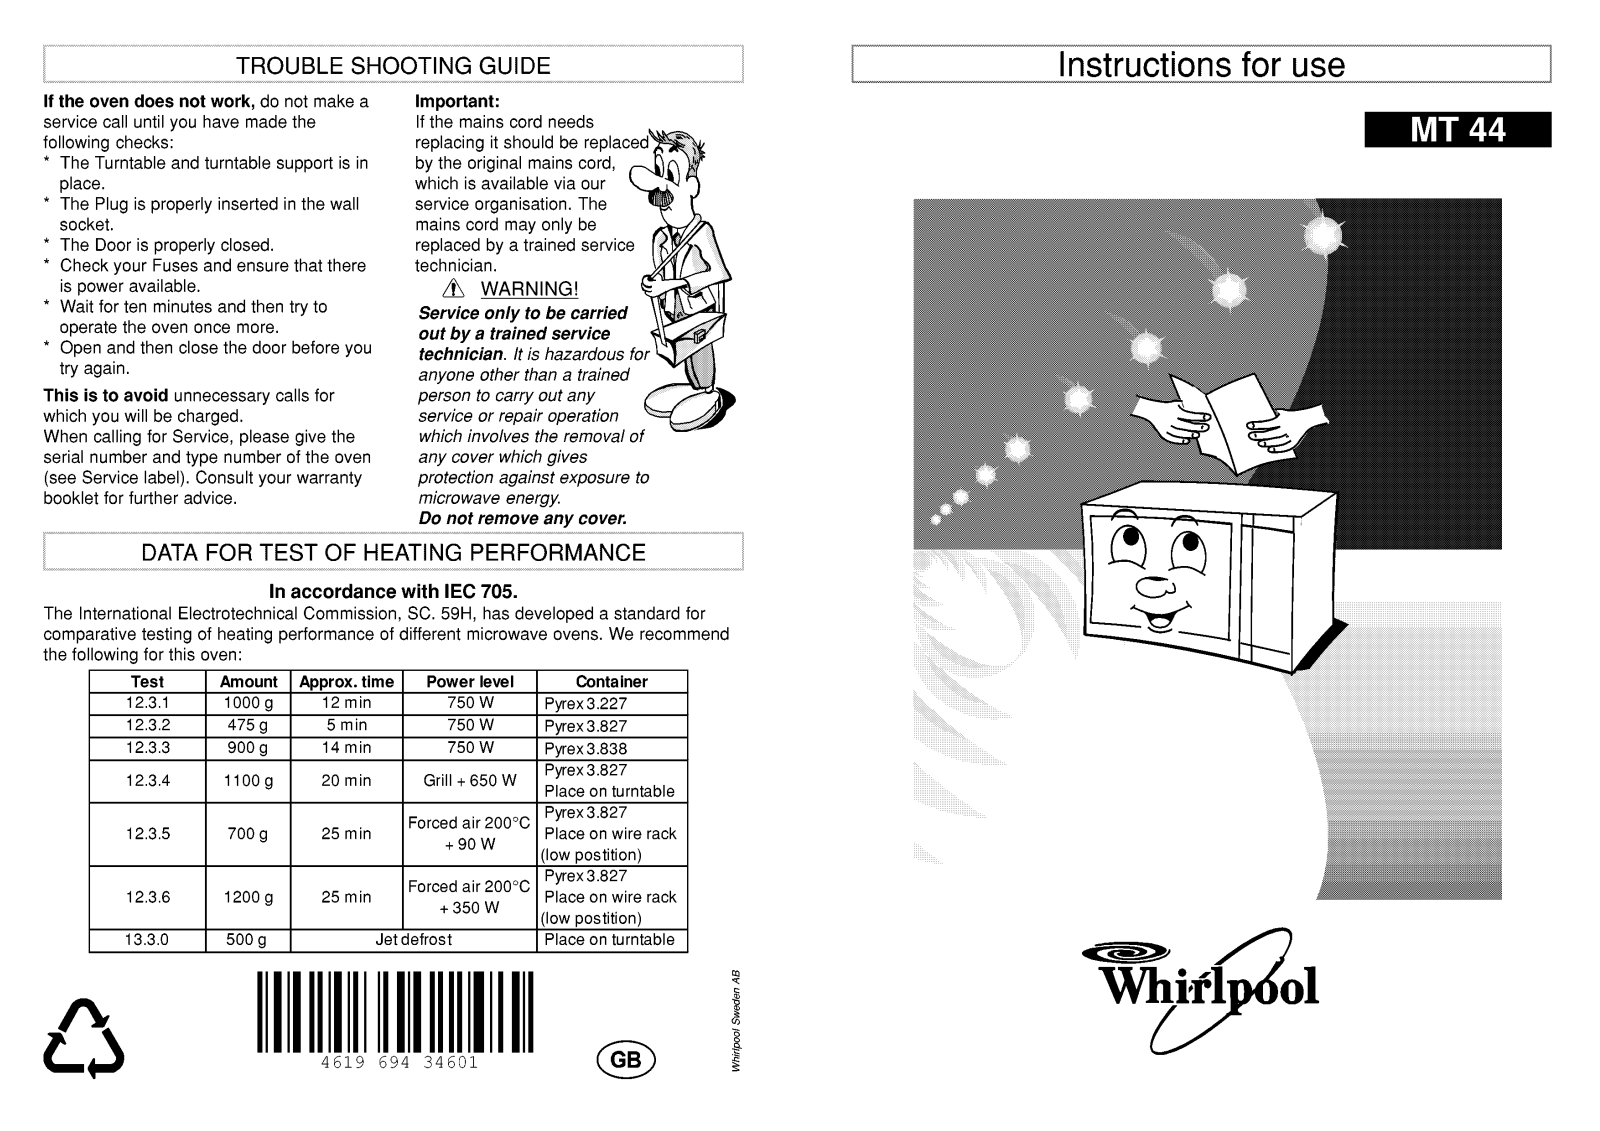 Whirlpool MT 44/WH INSTRUCTION FOR USE